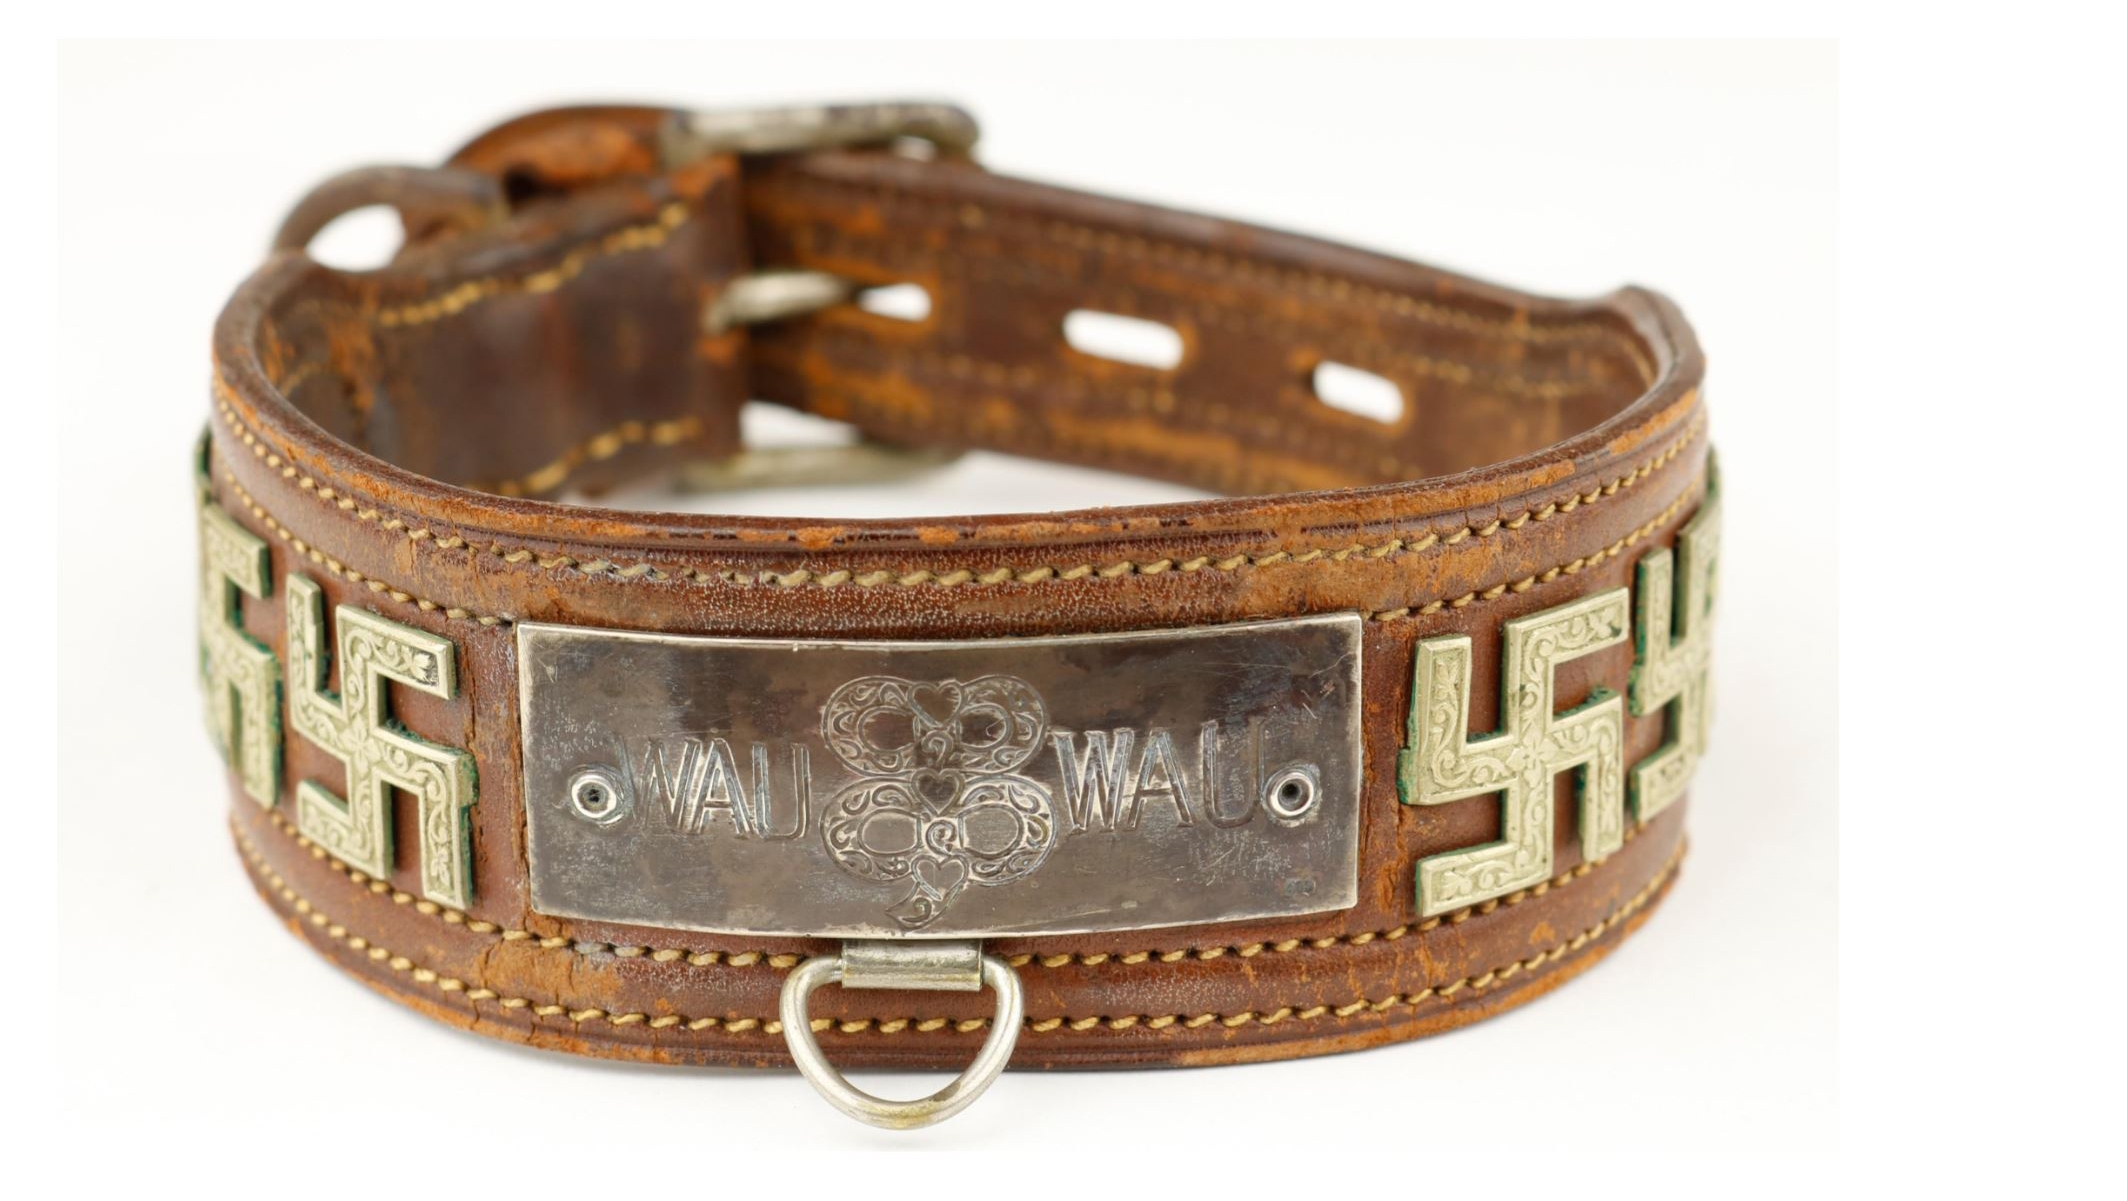 A dog collar said to have belonged to the Scottish terrier of Eva Braun, Adolf Hitler’s wife, on display on the website of Alexander Historical Auctions, July 28, 2022. ( Alexander Historical Auctions)